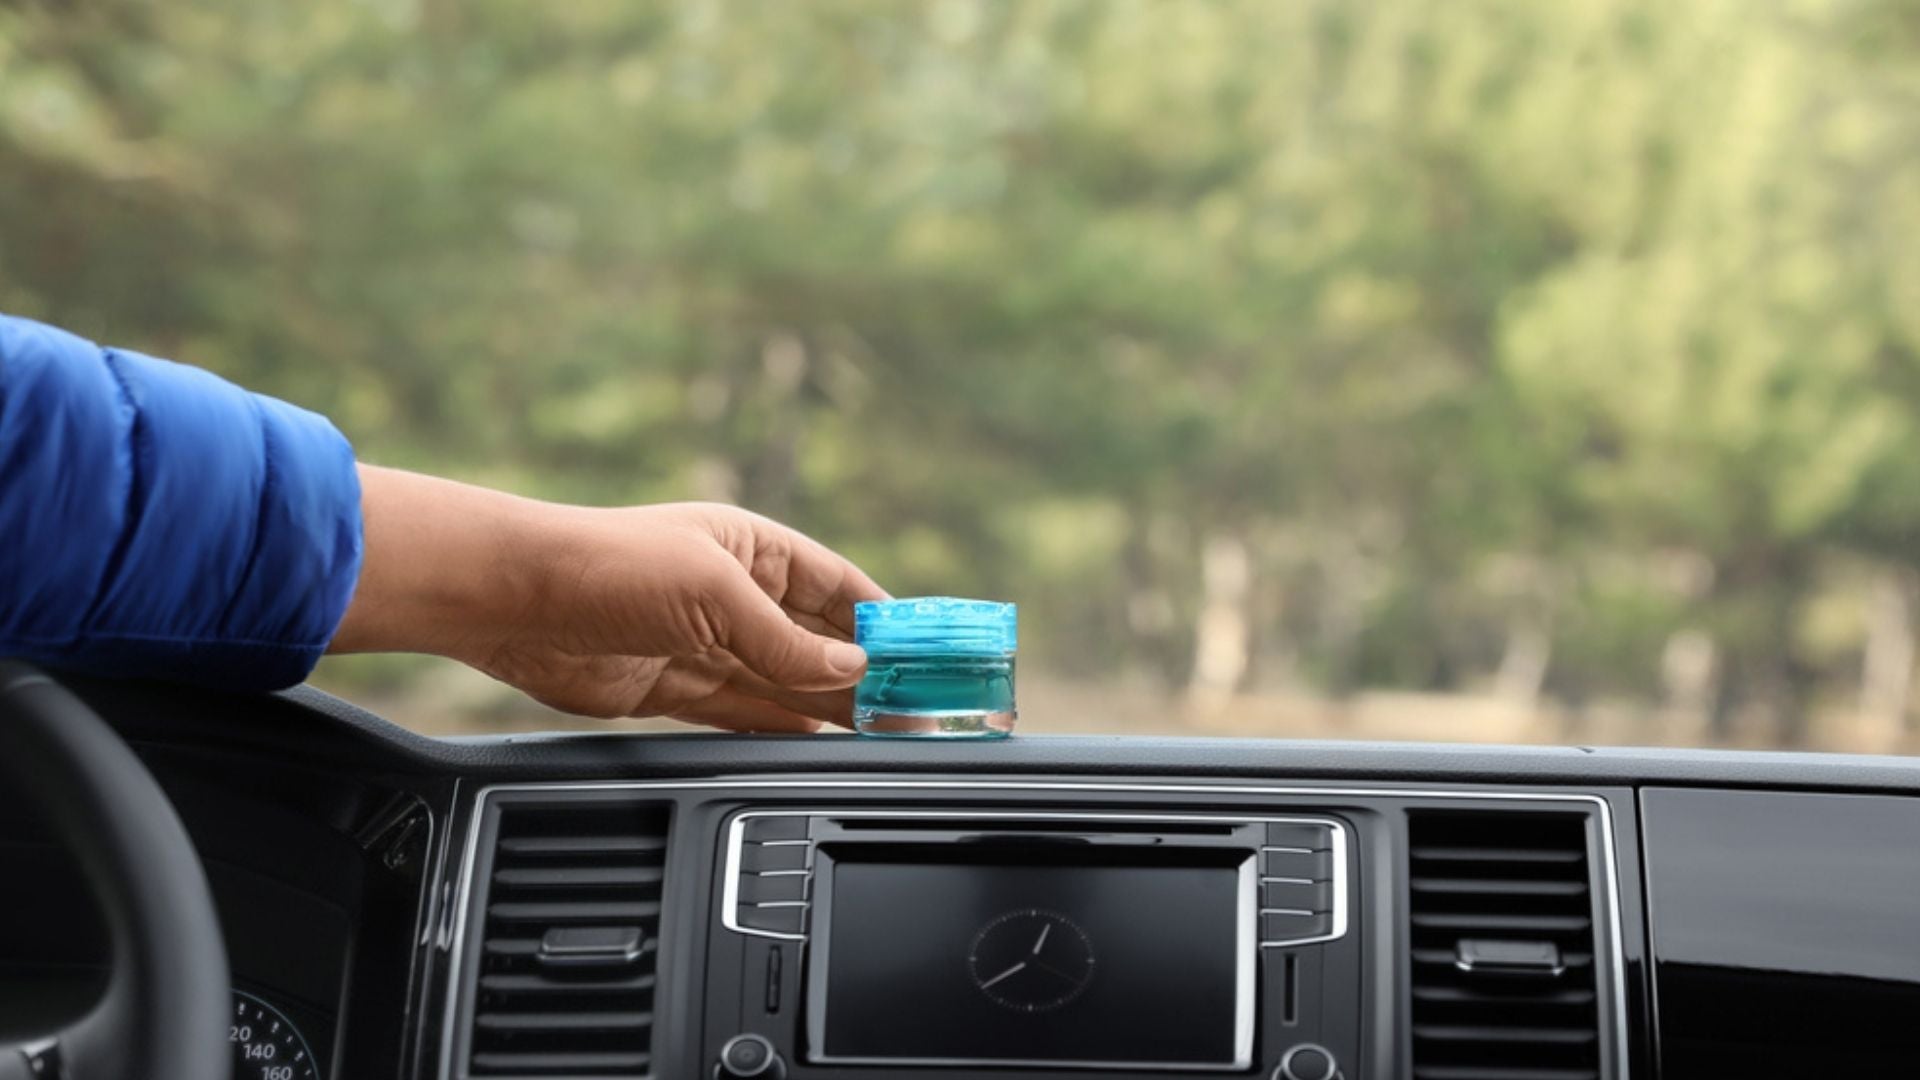 Long Lasting Car Freshener Gel to Keep your Car Fresh From Inside - Times  of India